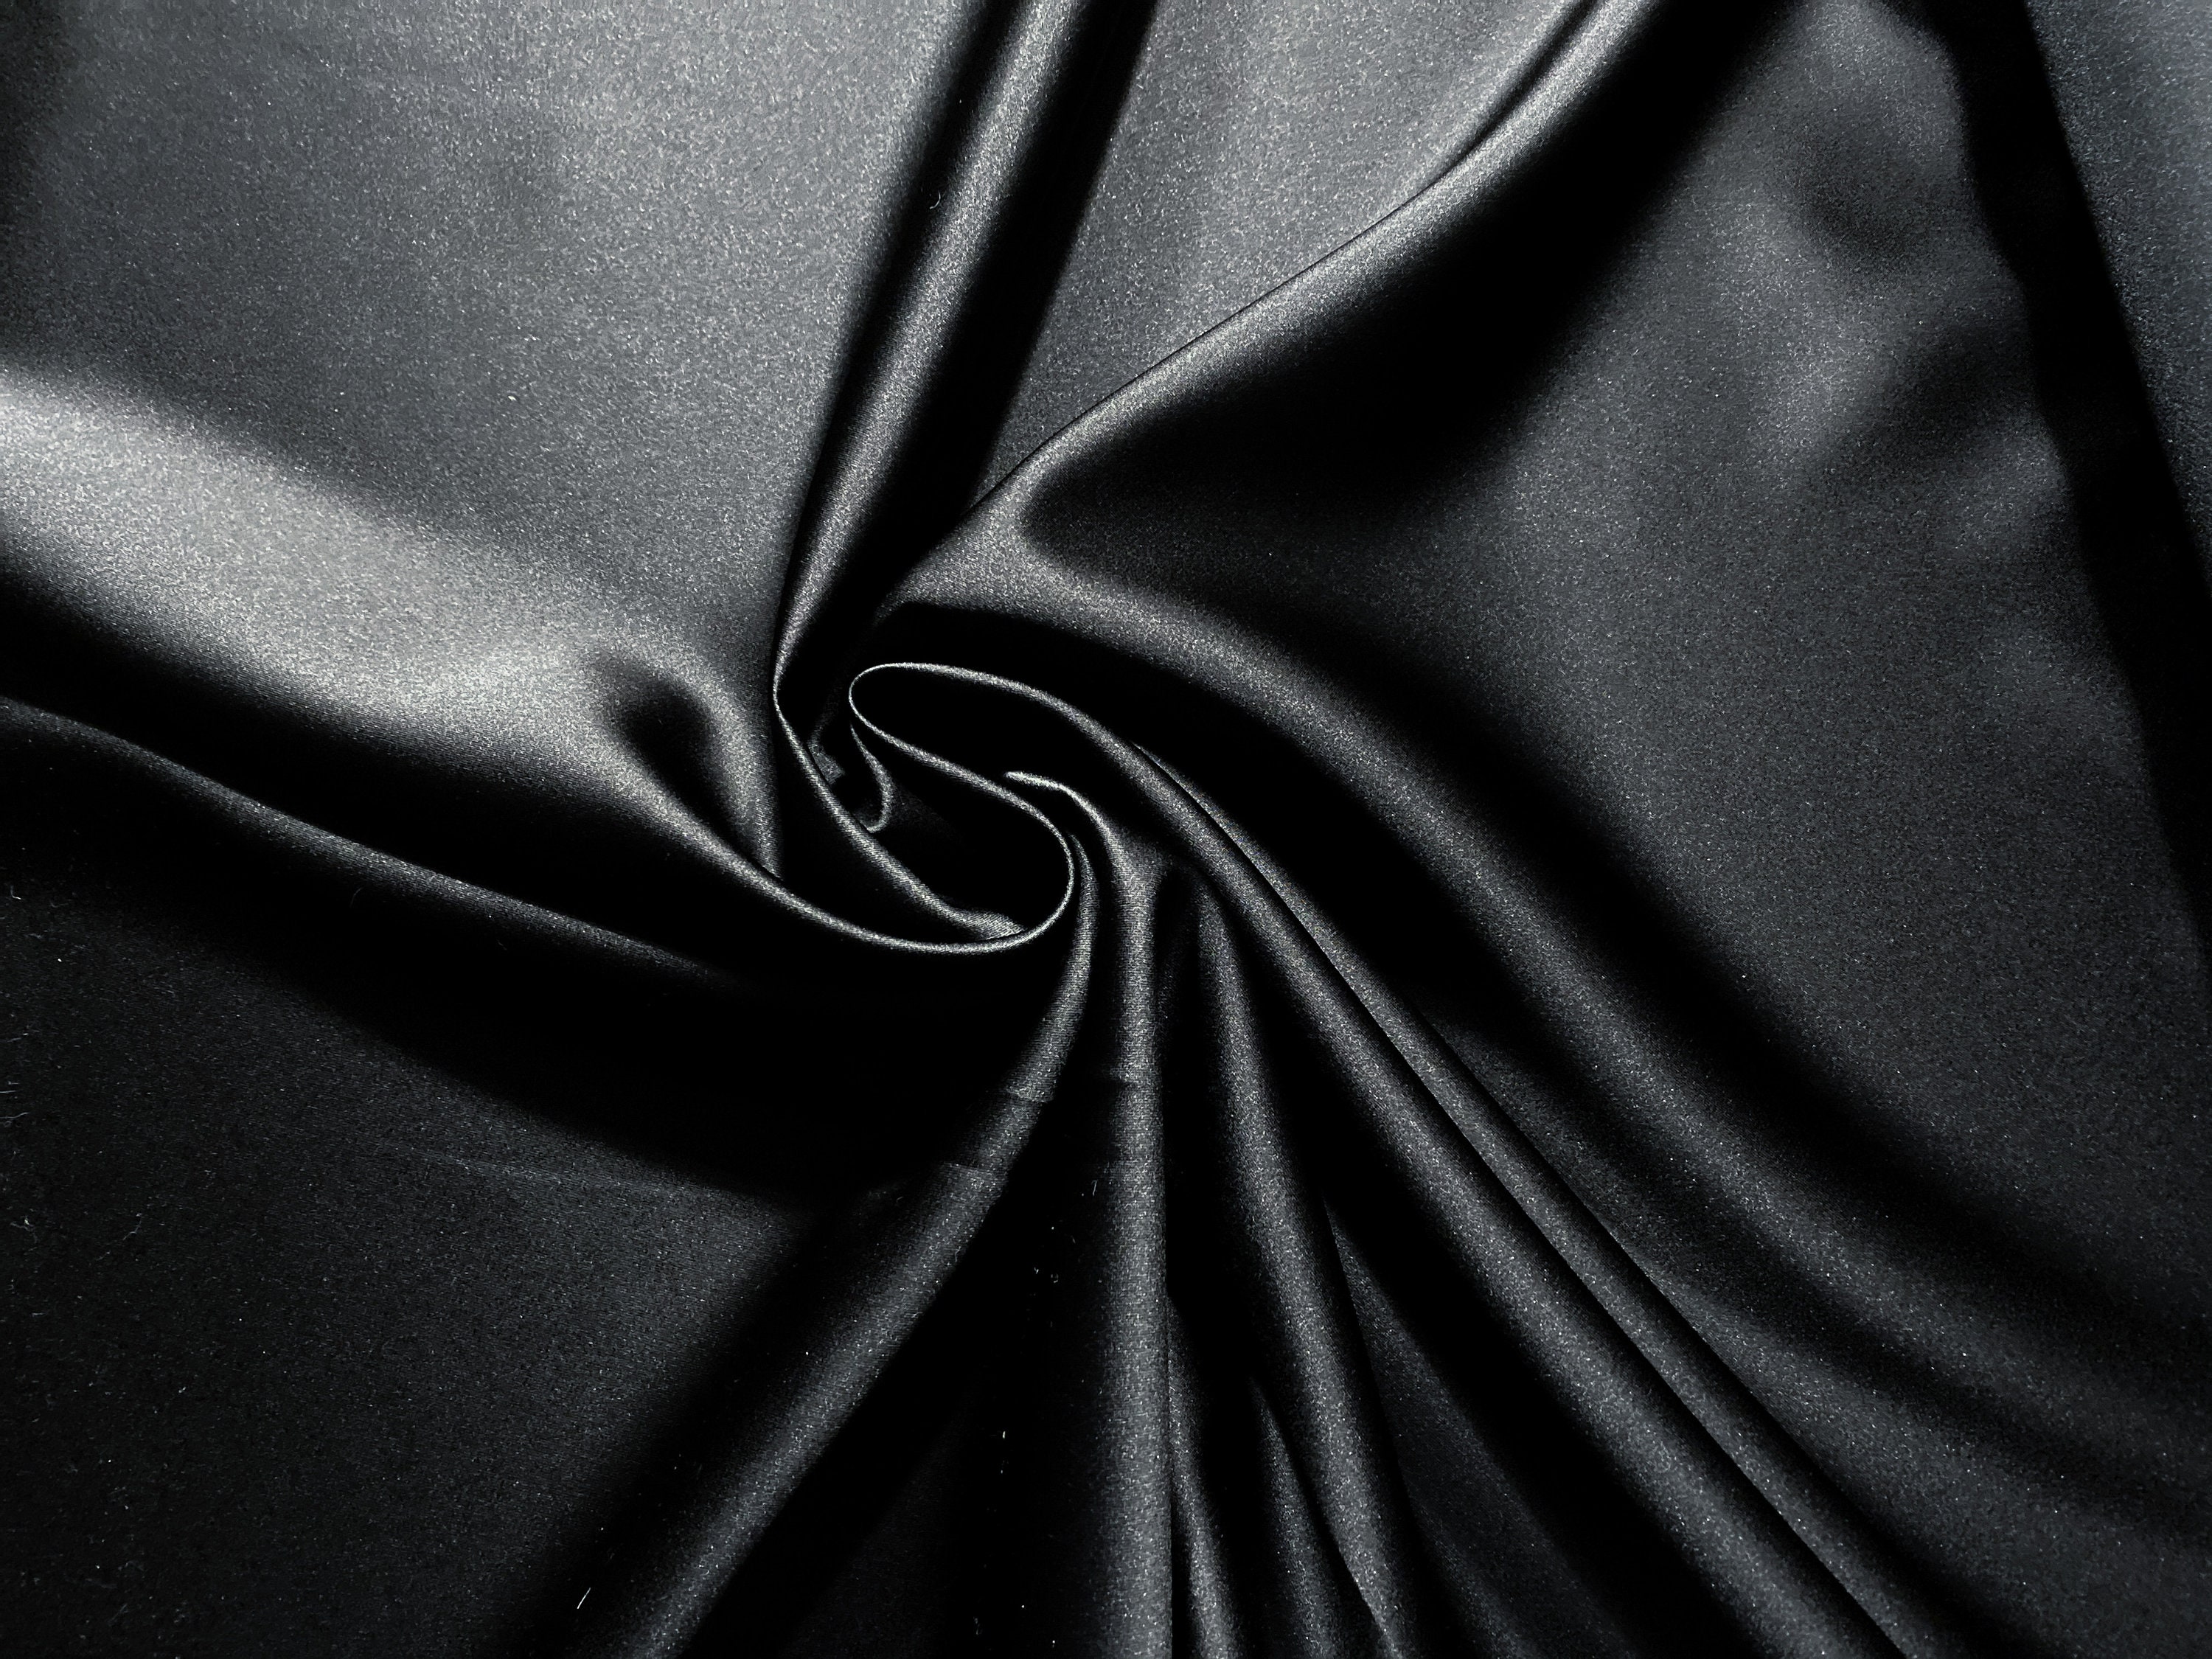 Black Heavyweight Polyamide Nylon Fabric Remnant multiple Remnants, Fabric  by the Yard, Fabric Scraps, Fabric Finds, Swimwear Fabric -  Denmark